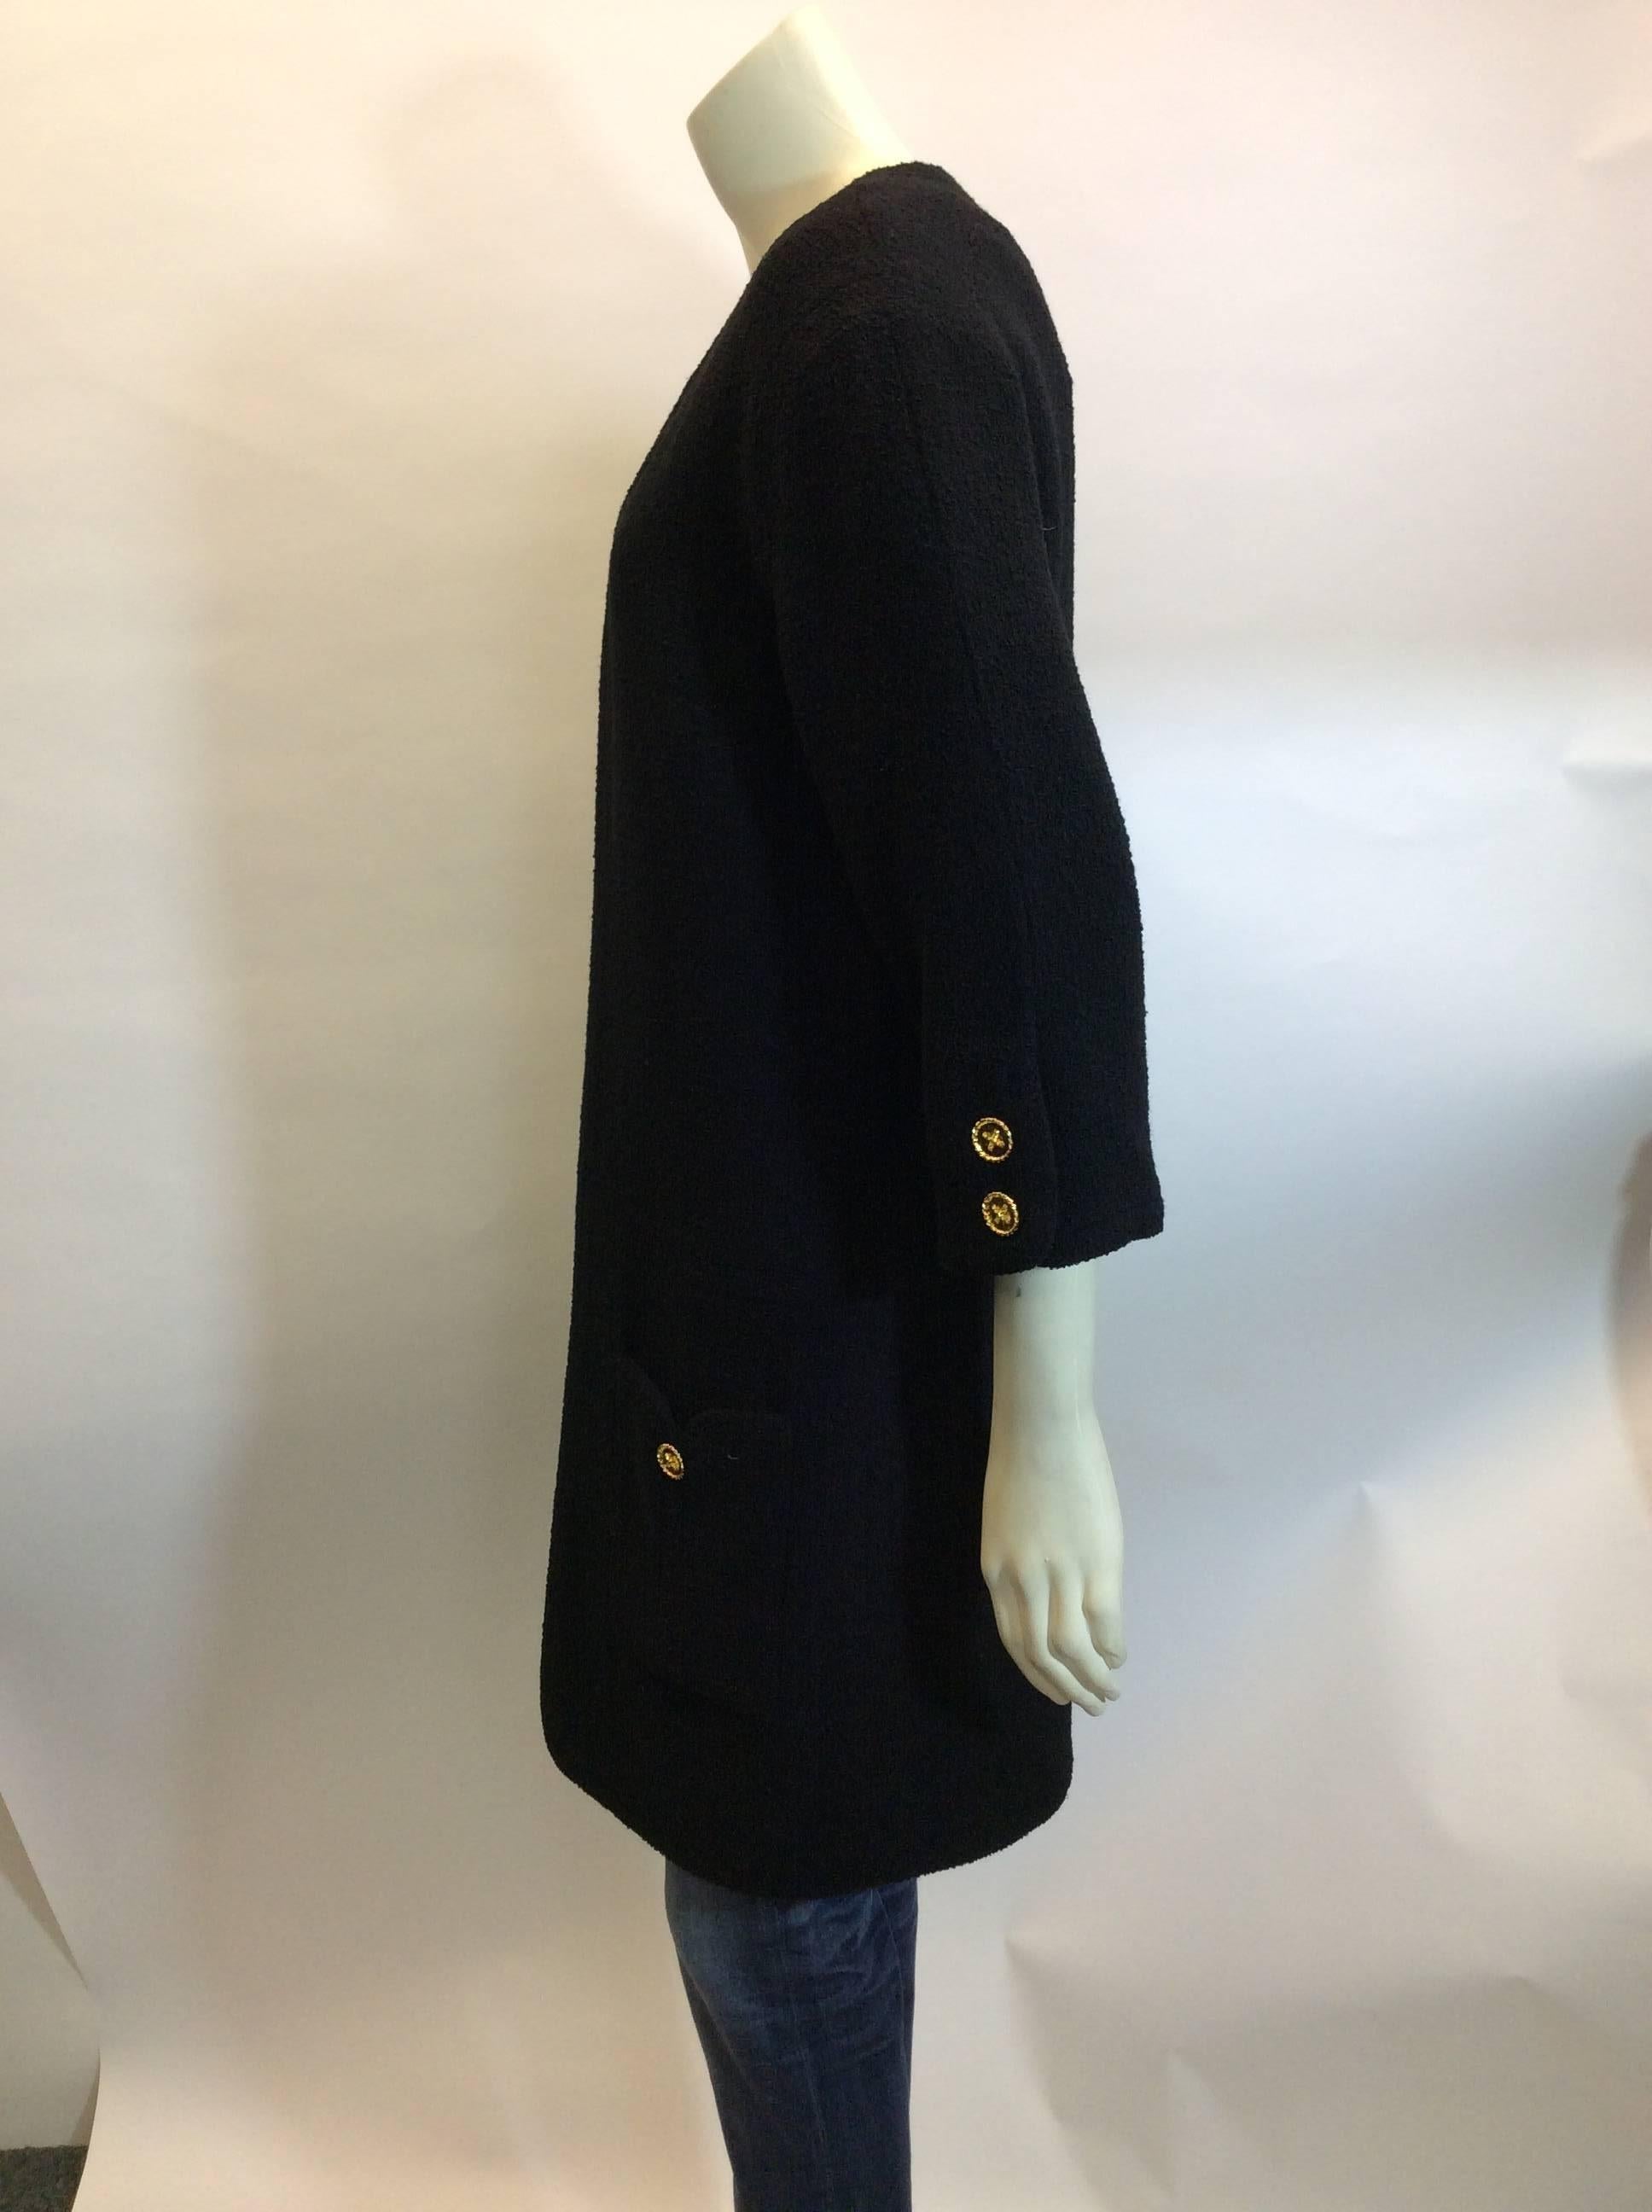 Edward Archour Wool Open Jacket In Excellent Condition For Sale In Narberth, PA